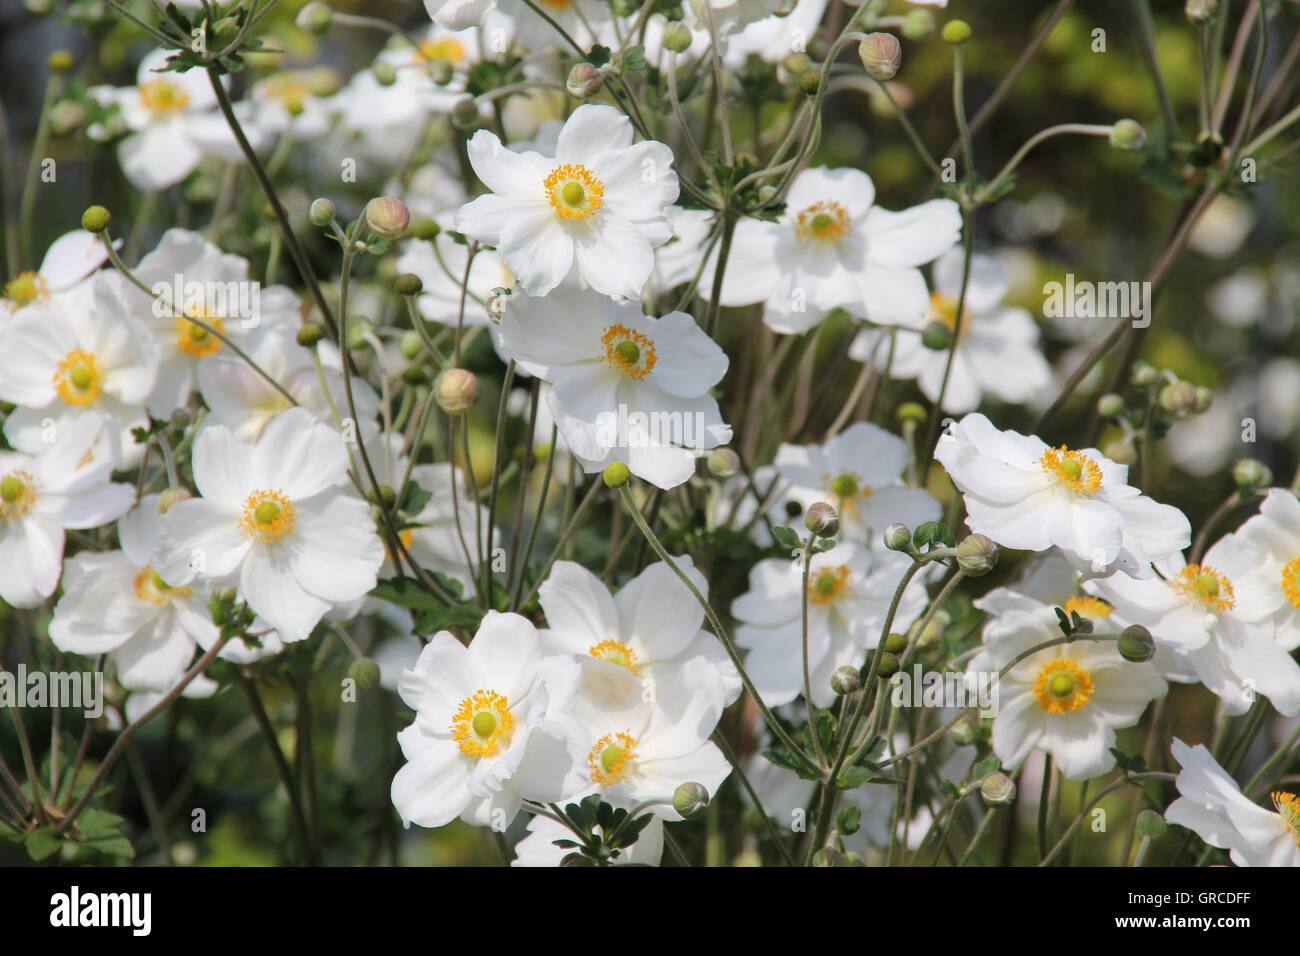 Autumn Anemones High Resolution Stock Photography and Images - Alamy